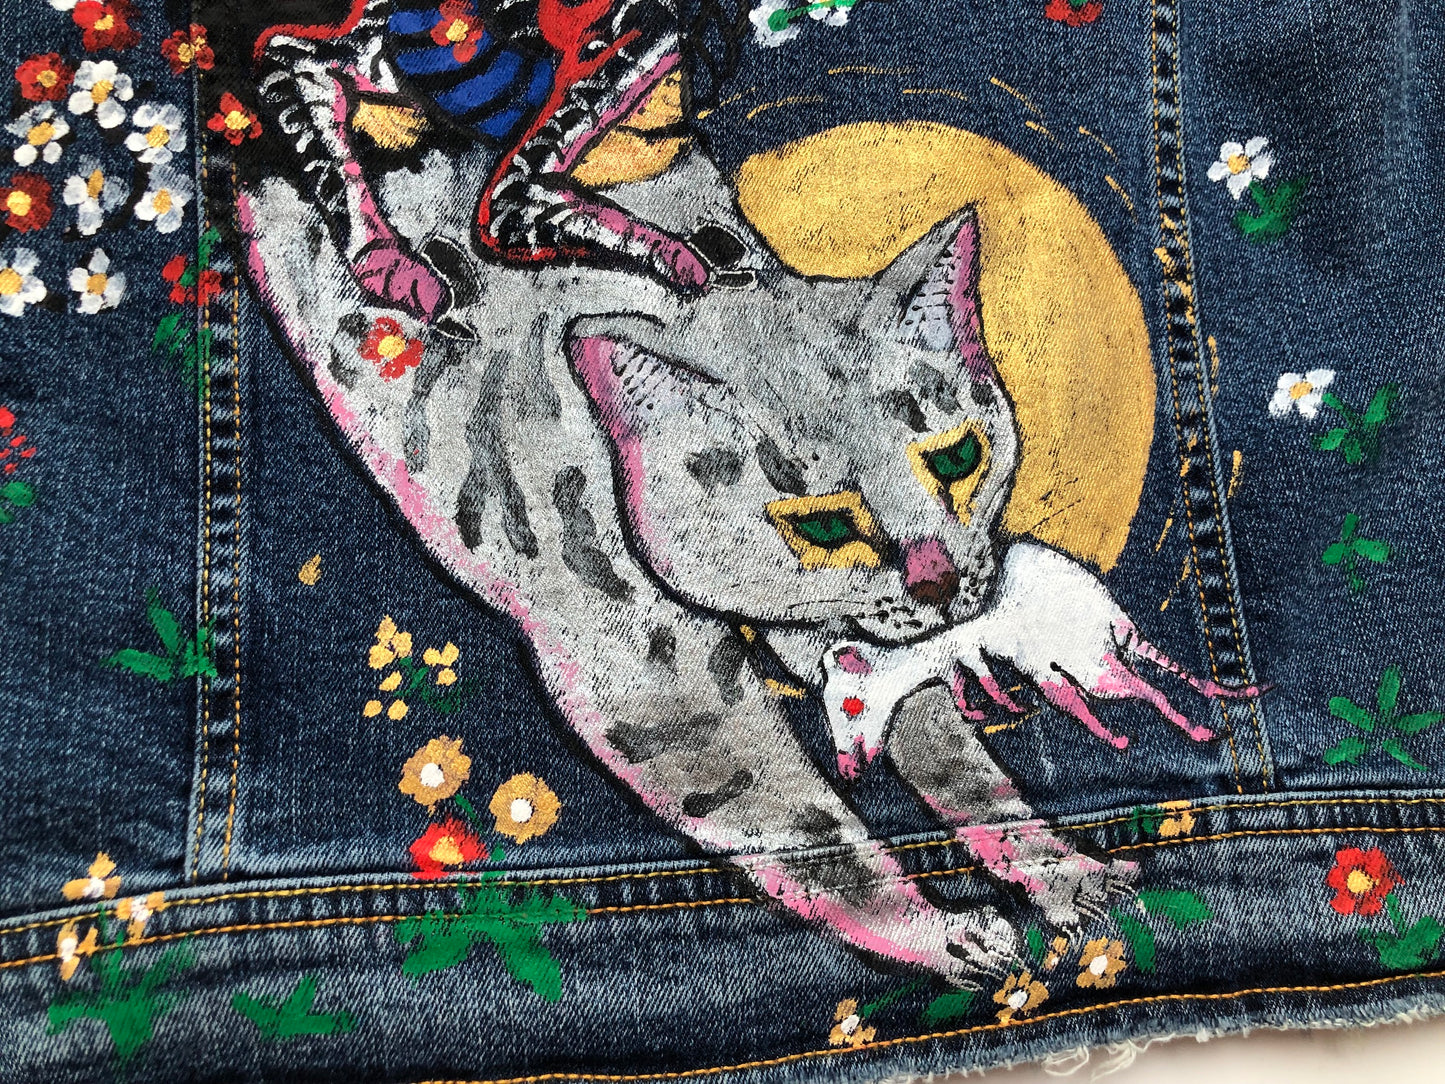 A jumping cat with a mouse in its teeth and a demon's hooves on a women's denim jacket